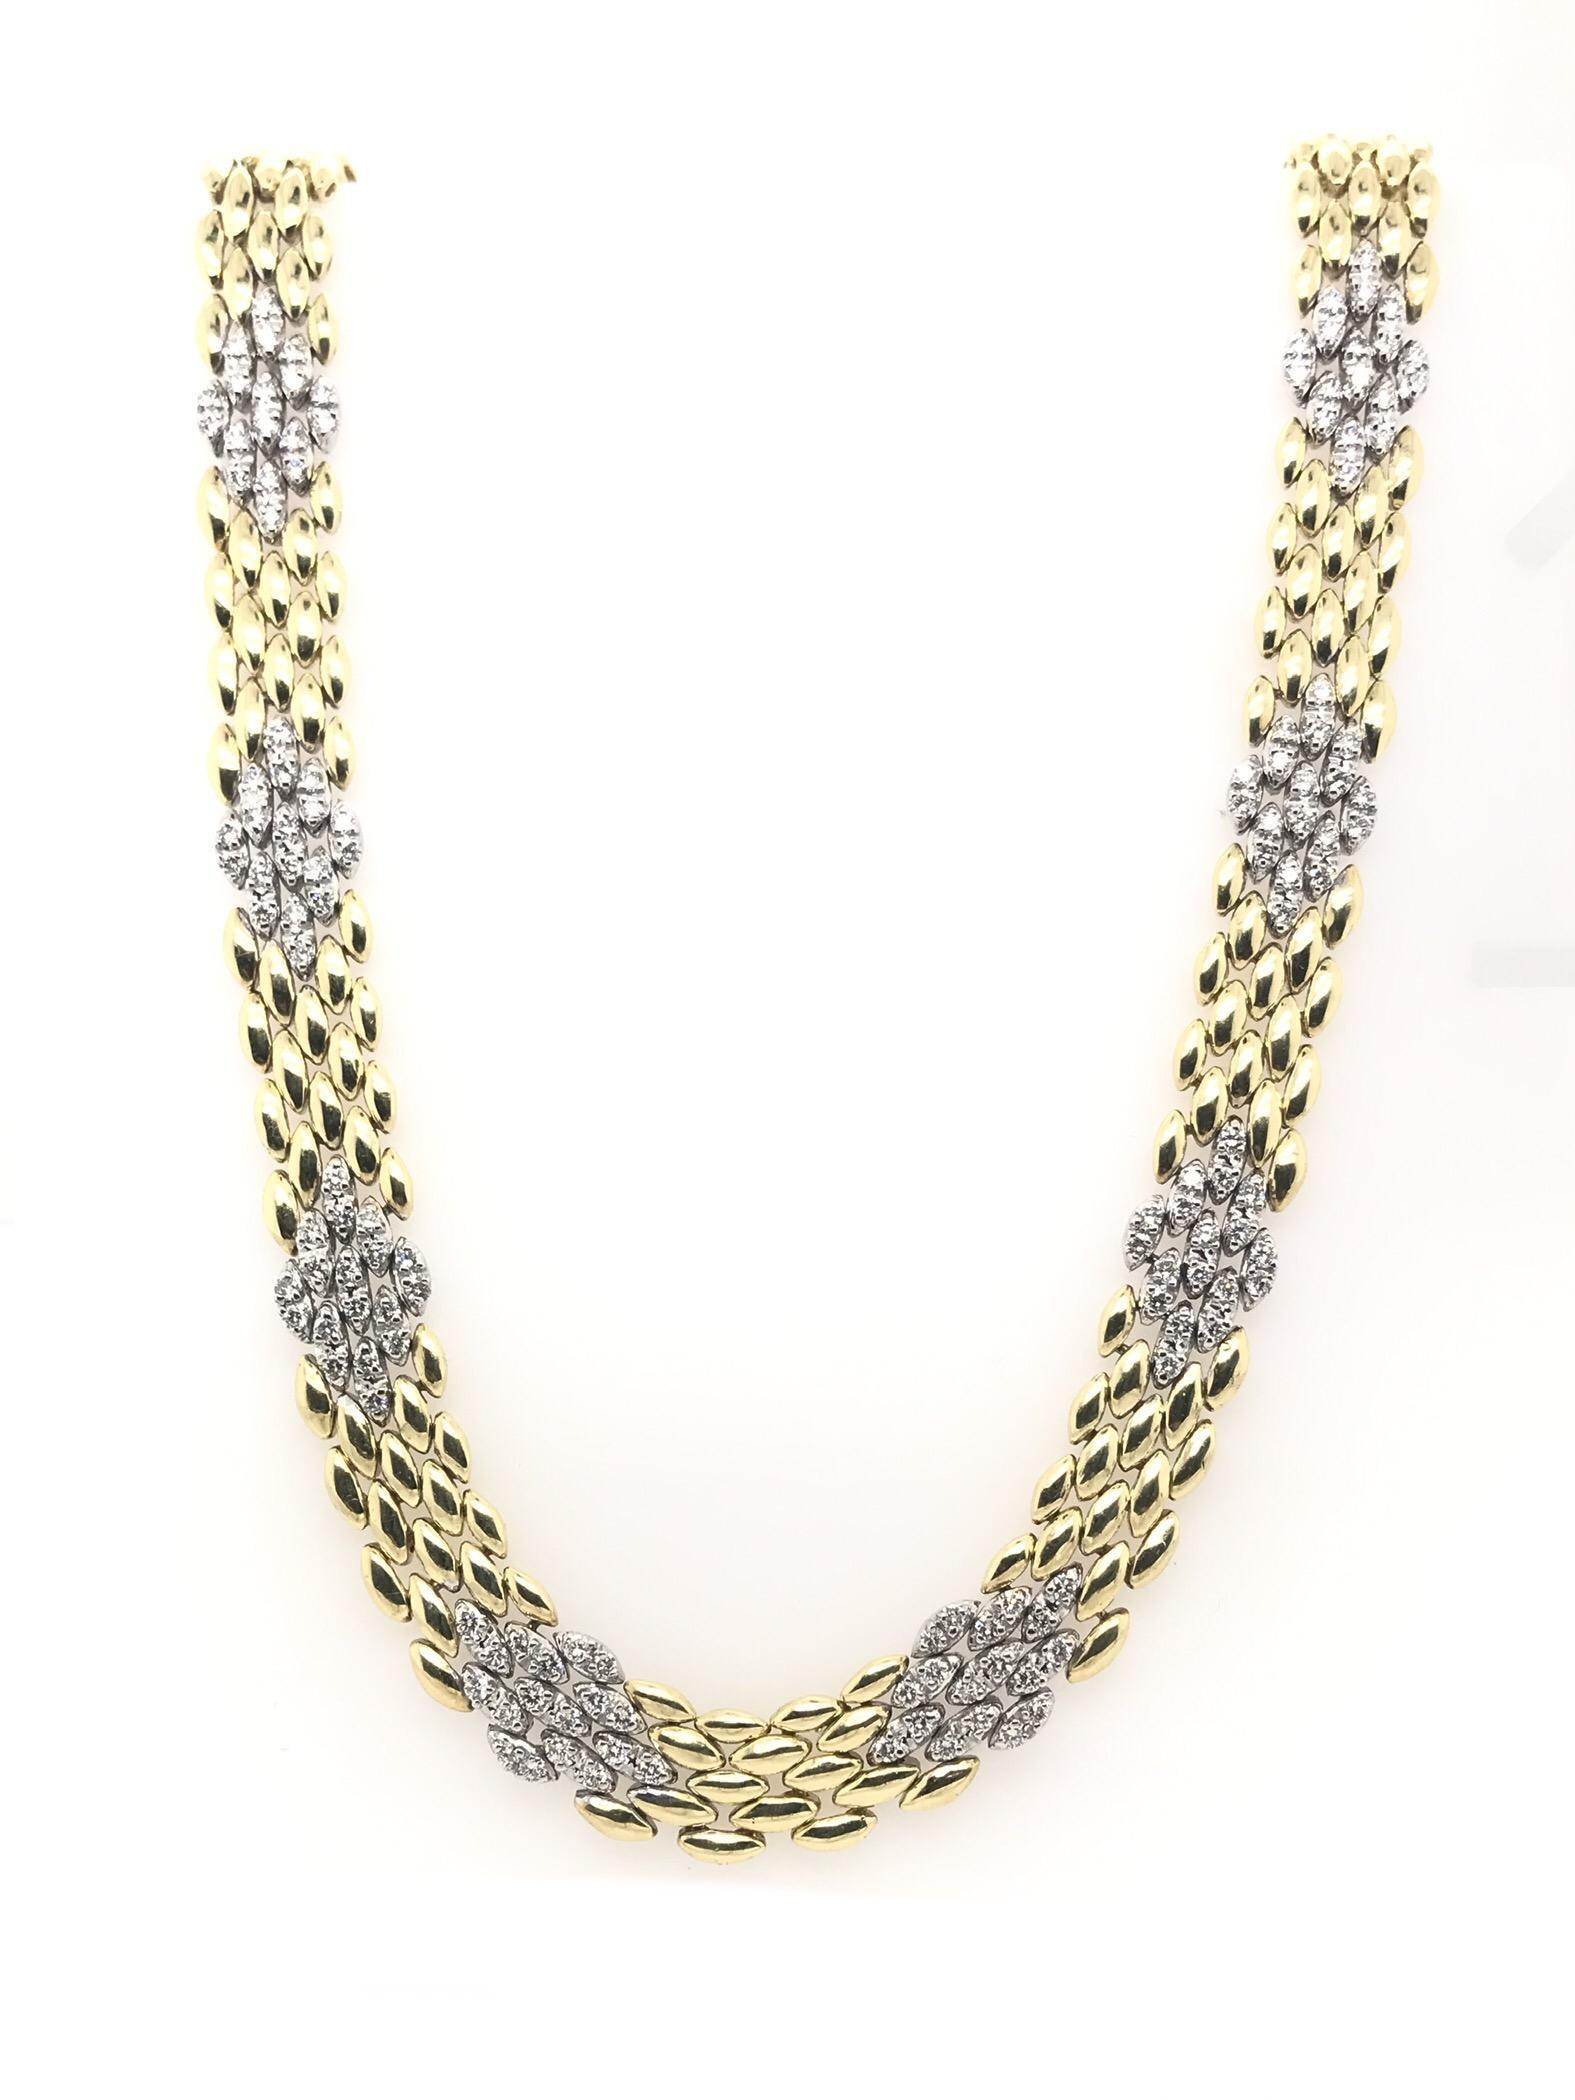 This stunning contemporary estate piece is crafted from 18K gold and white gold links. The necklace measures approximately 17 inches in length. The piece features 81 diamond links featuring 162 diamonds total. The necklace has an estimated combined